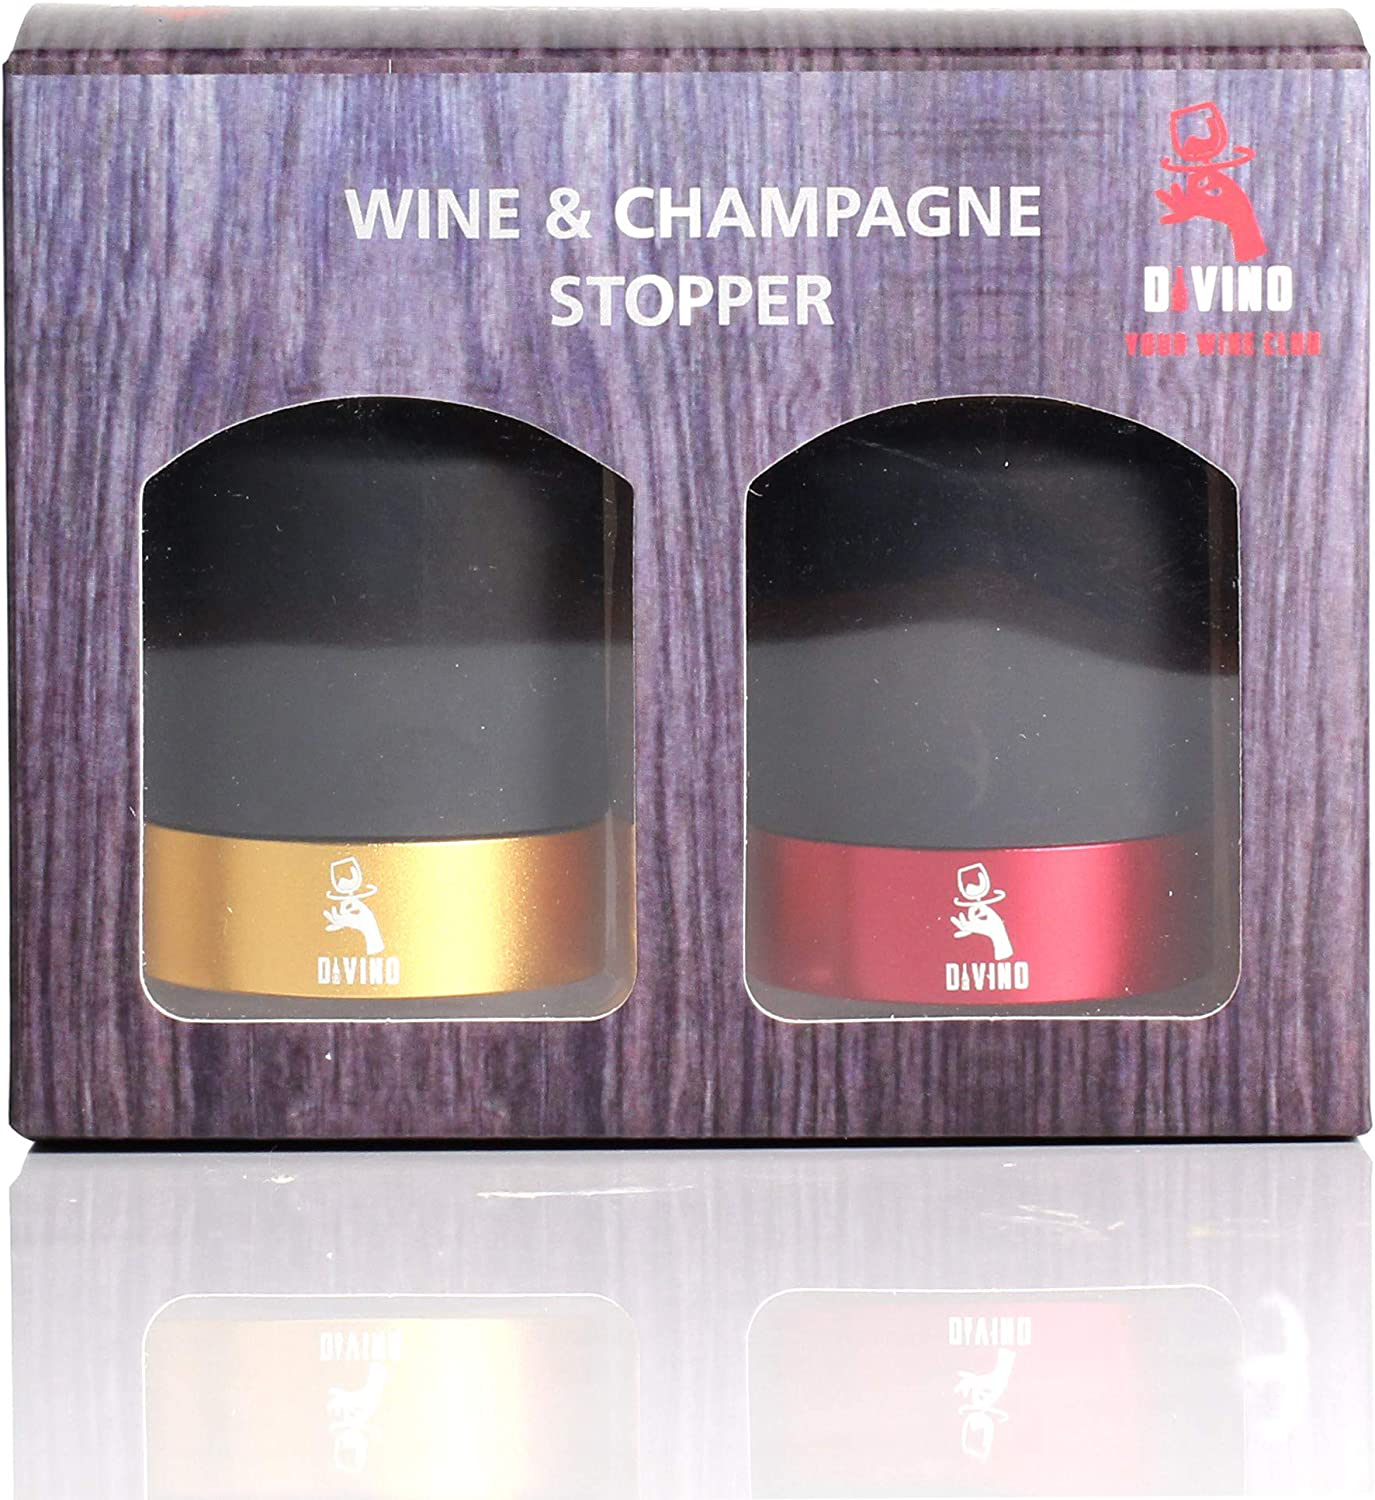 Champagne Stopper with Aluminium Ring, Professional Bottle Sealer for Champagne, Cava, Prosecco & Sparkling Wine, Saver Plug, Compact Champagne Bottle Plug (GOLD, Champagne)